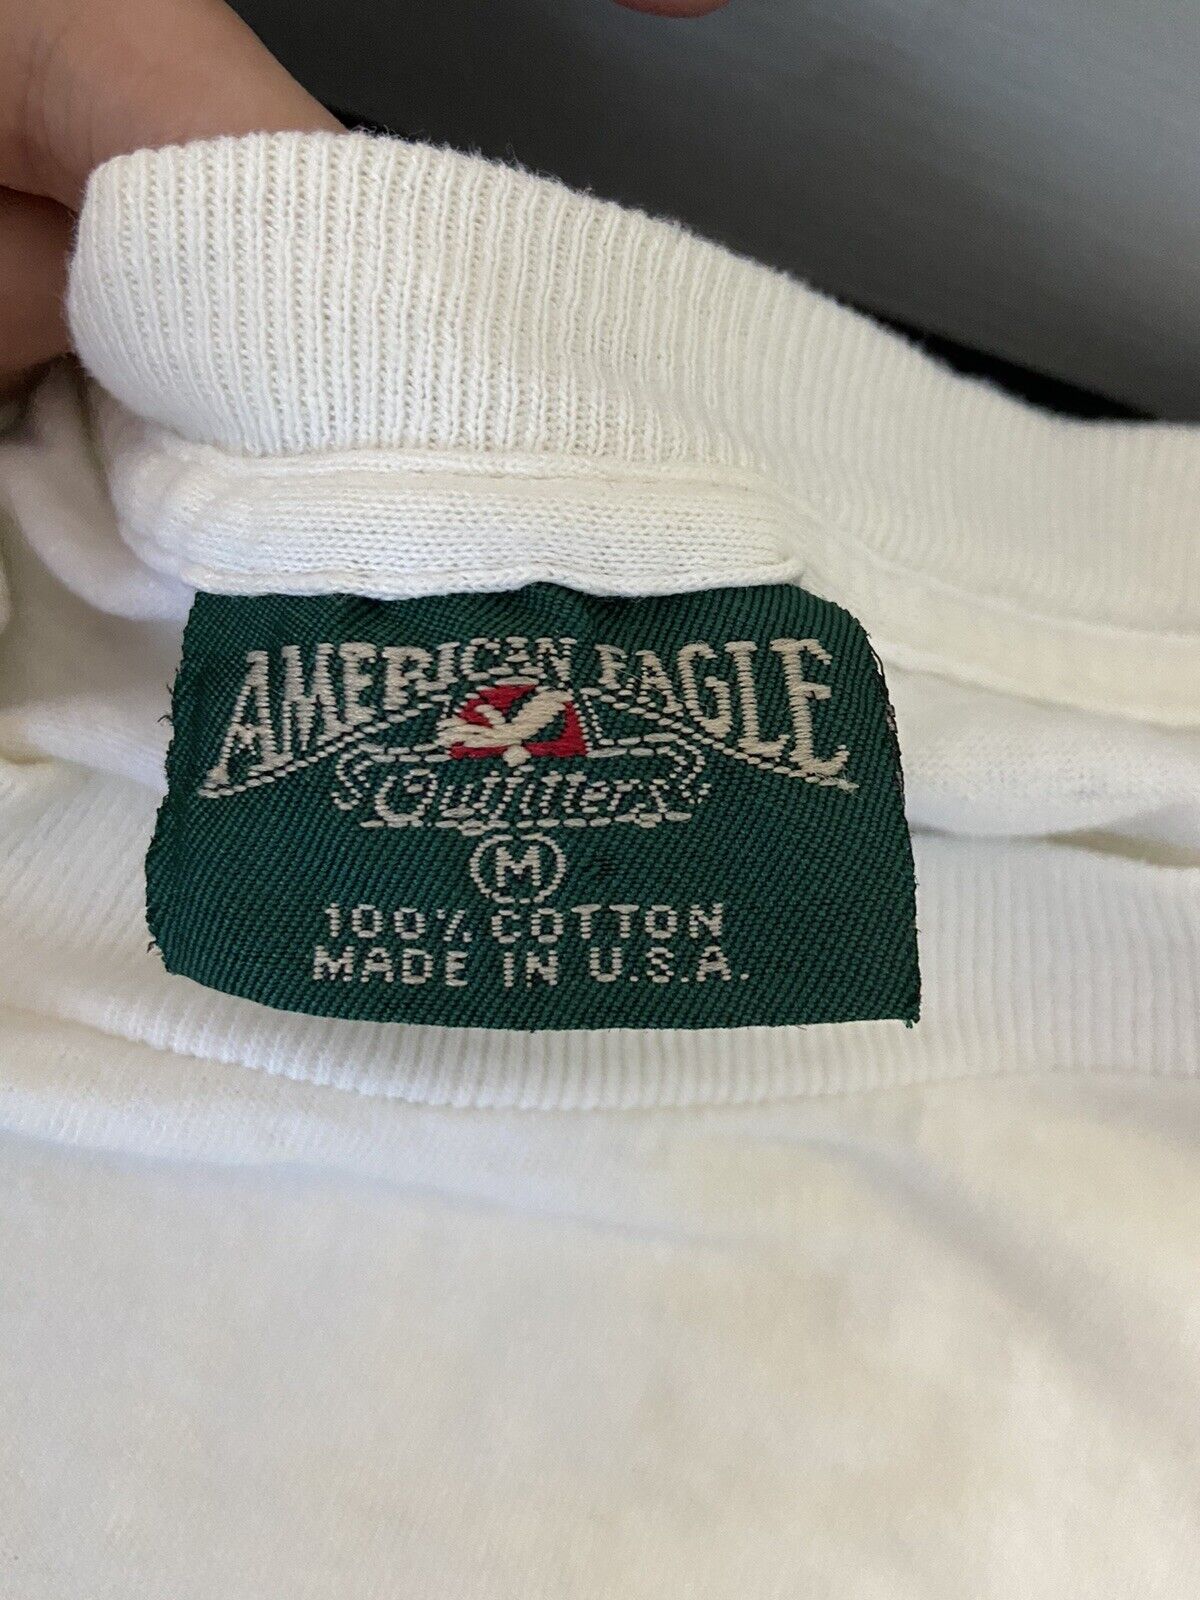 1970's Vintage American Eagle Outfitters GOLF TRA… - image 4